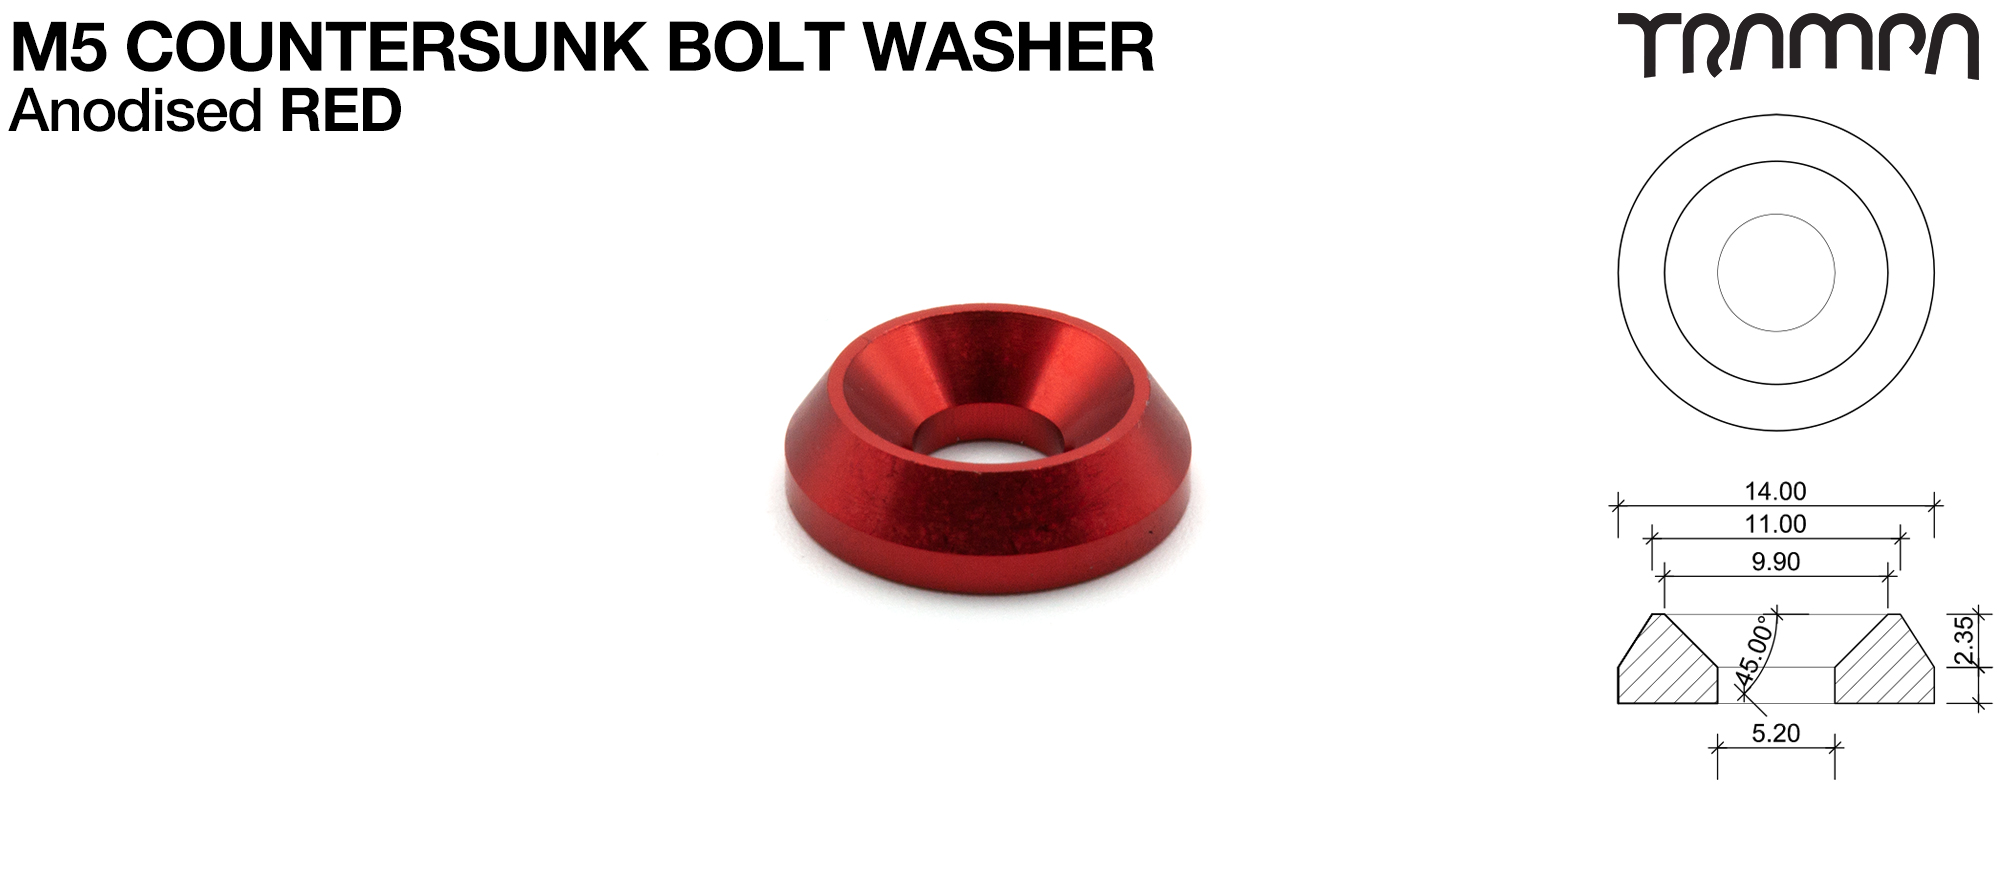 RED Anodised M5 Countersunk Washers